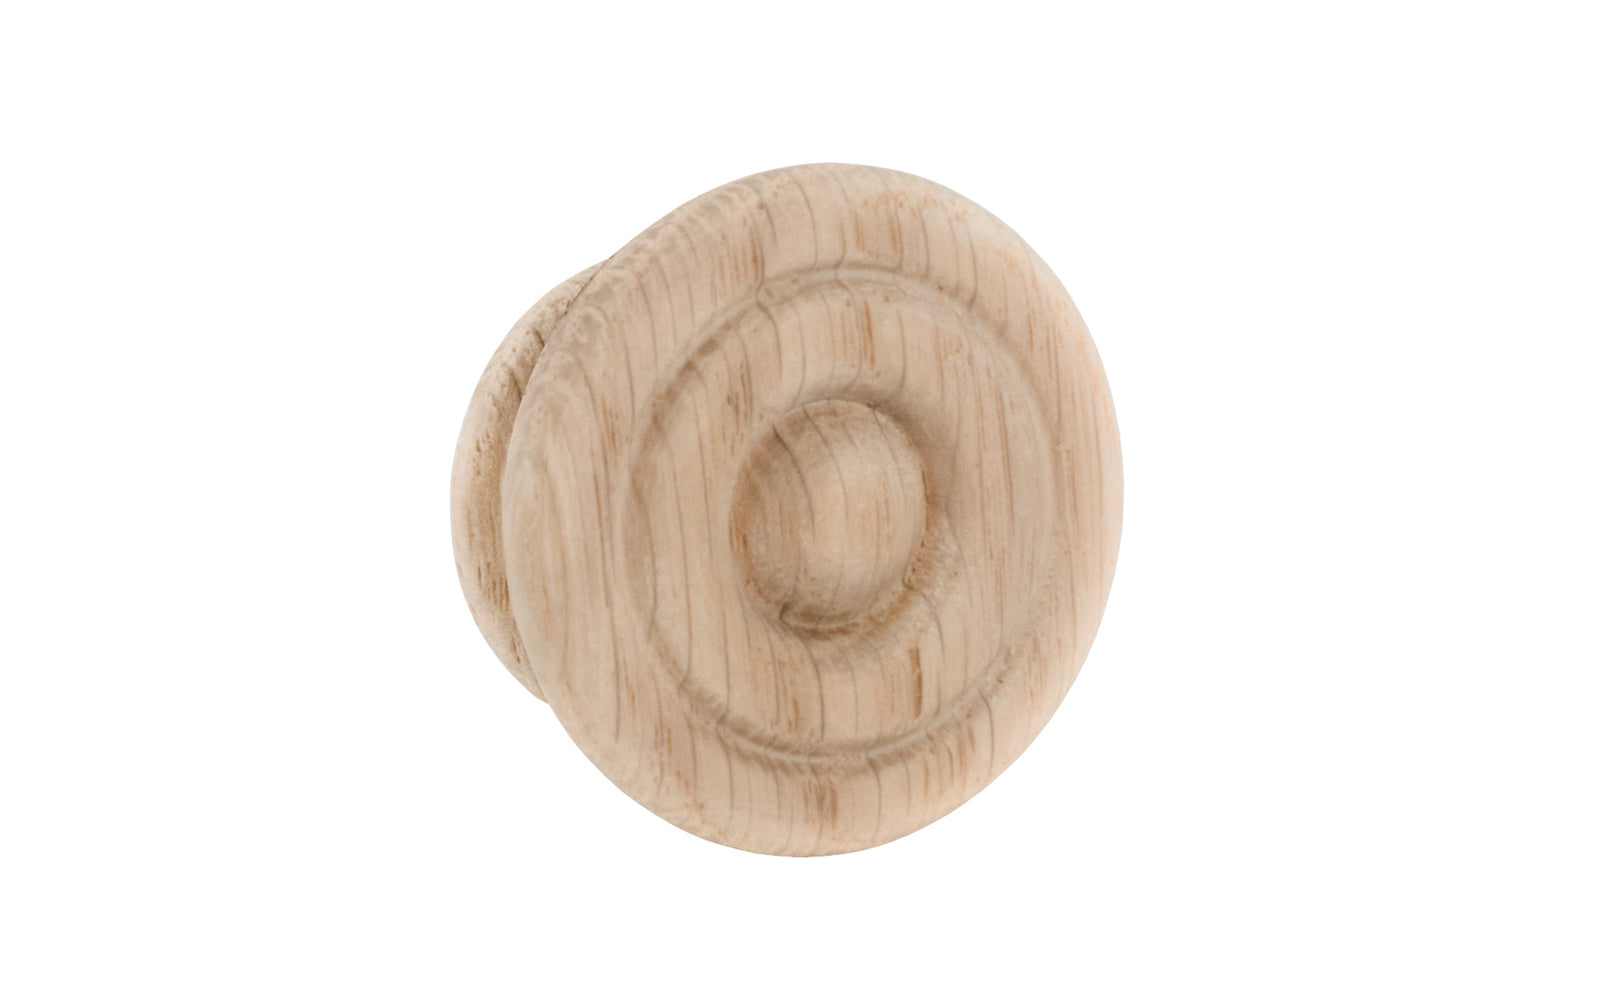 A classic oak wood round cabinet knob with a smooth ring circle design. They may be stained, painted, or varnished if desired. Late 19th Century style of hardware. Great for a wide variety of uses including drawers, kitchen cabinets, smaller doors, furniture, cabinet doors. 1-1/2" diameter knob.